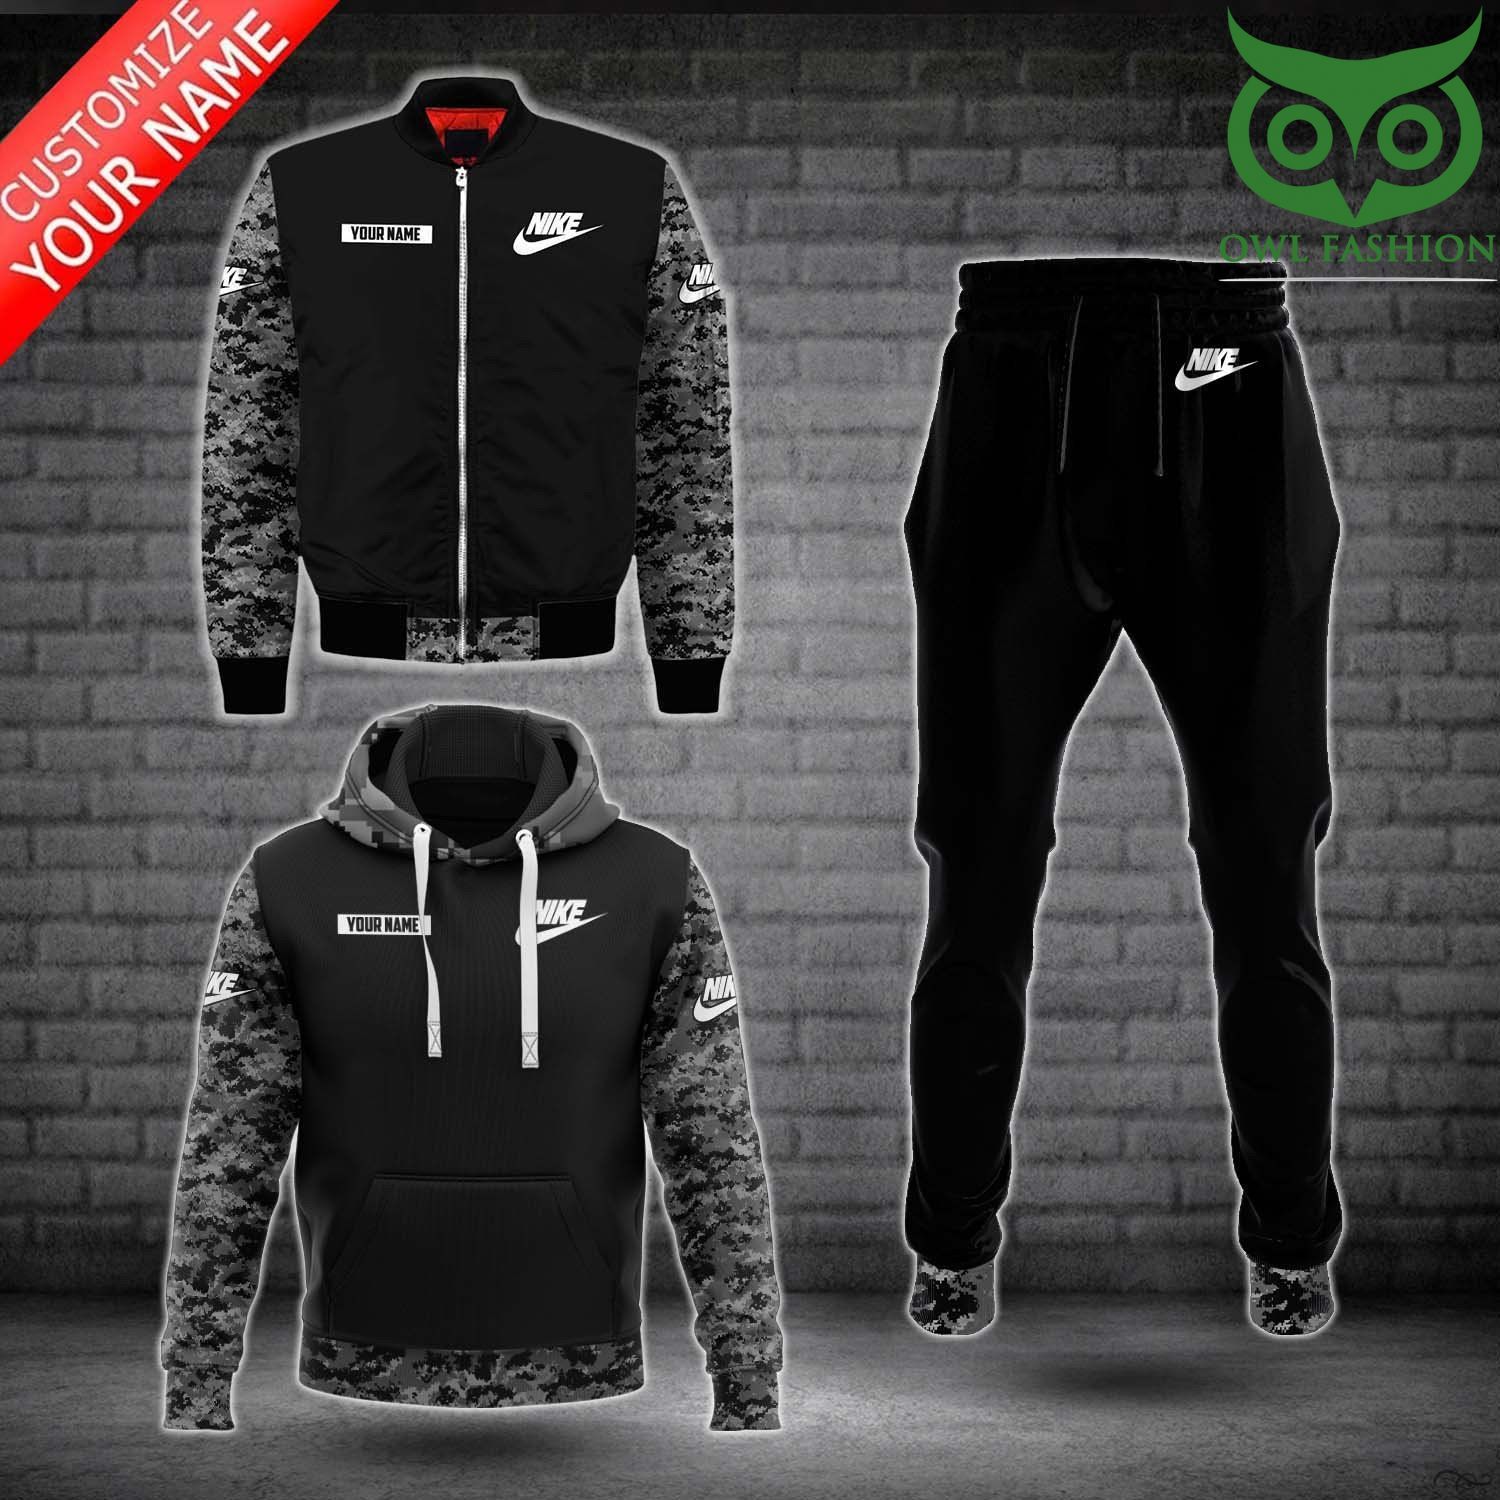 148 Personalized Nike grey and black camo bomber jacket hoodies and sweatpants